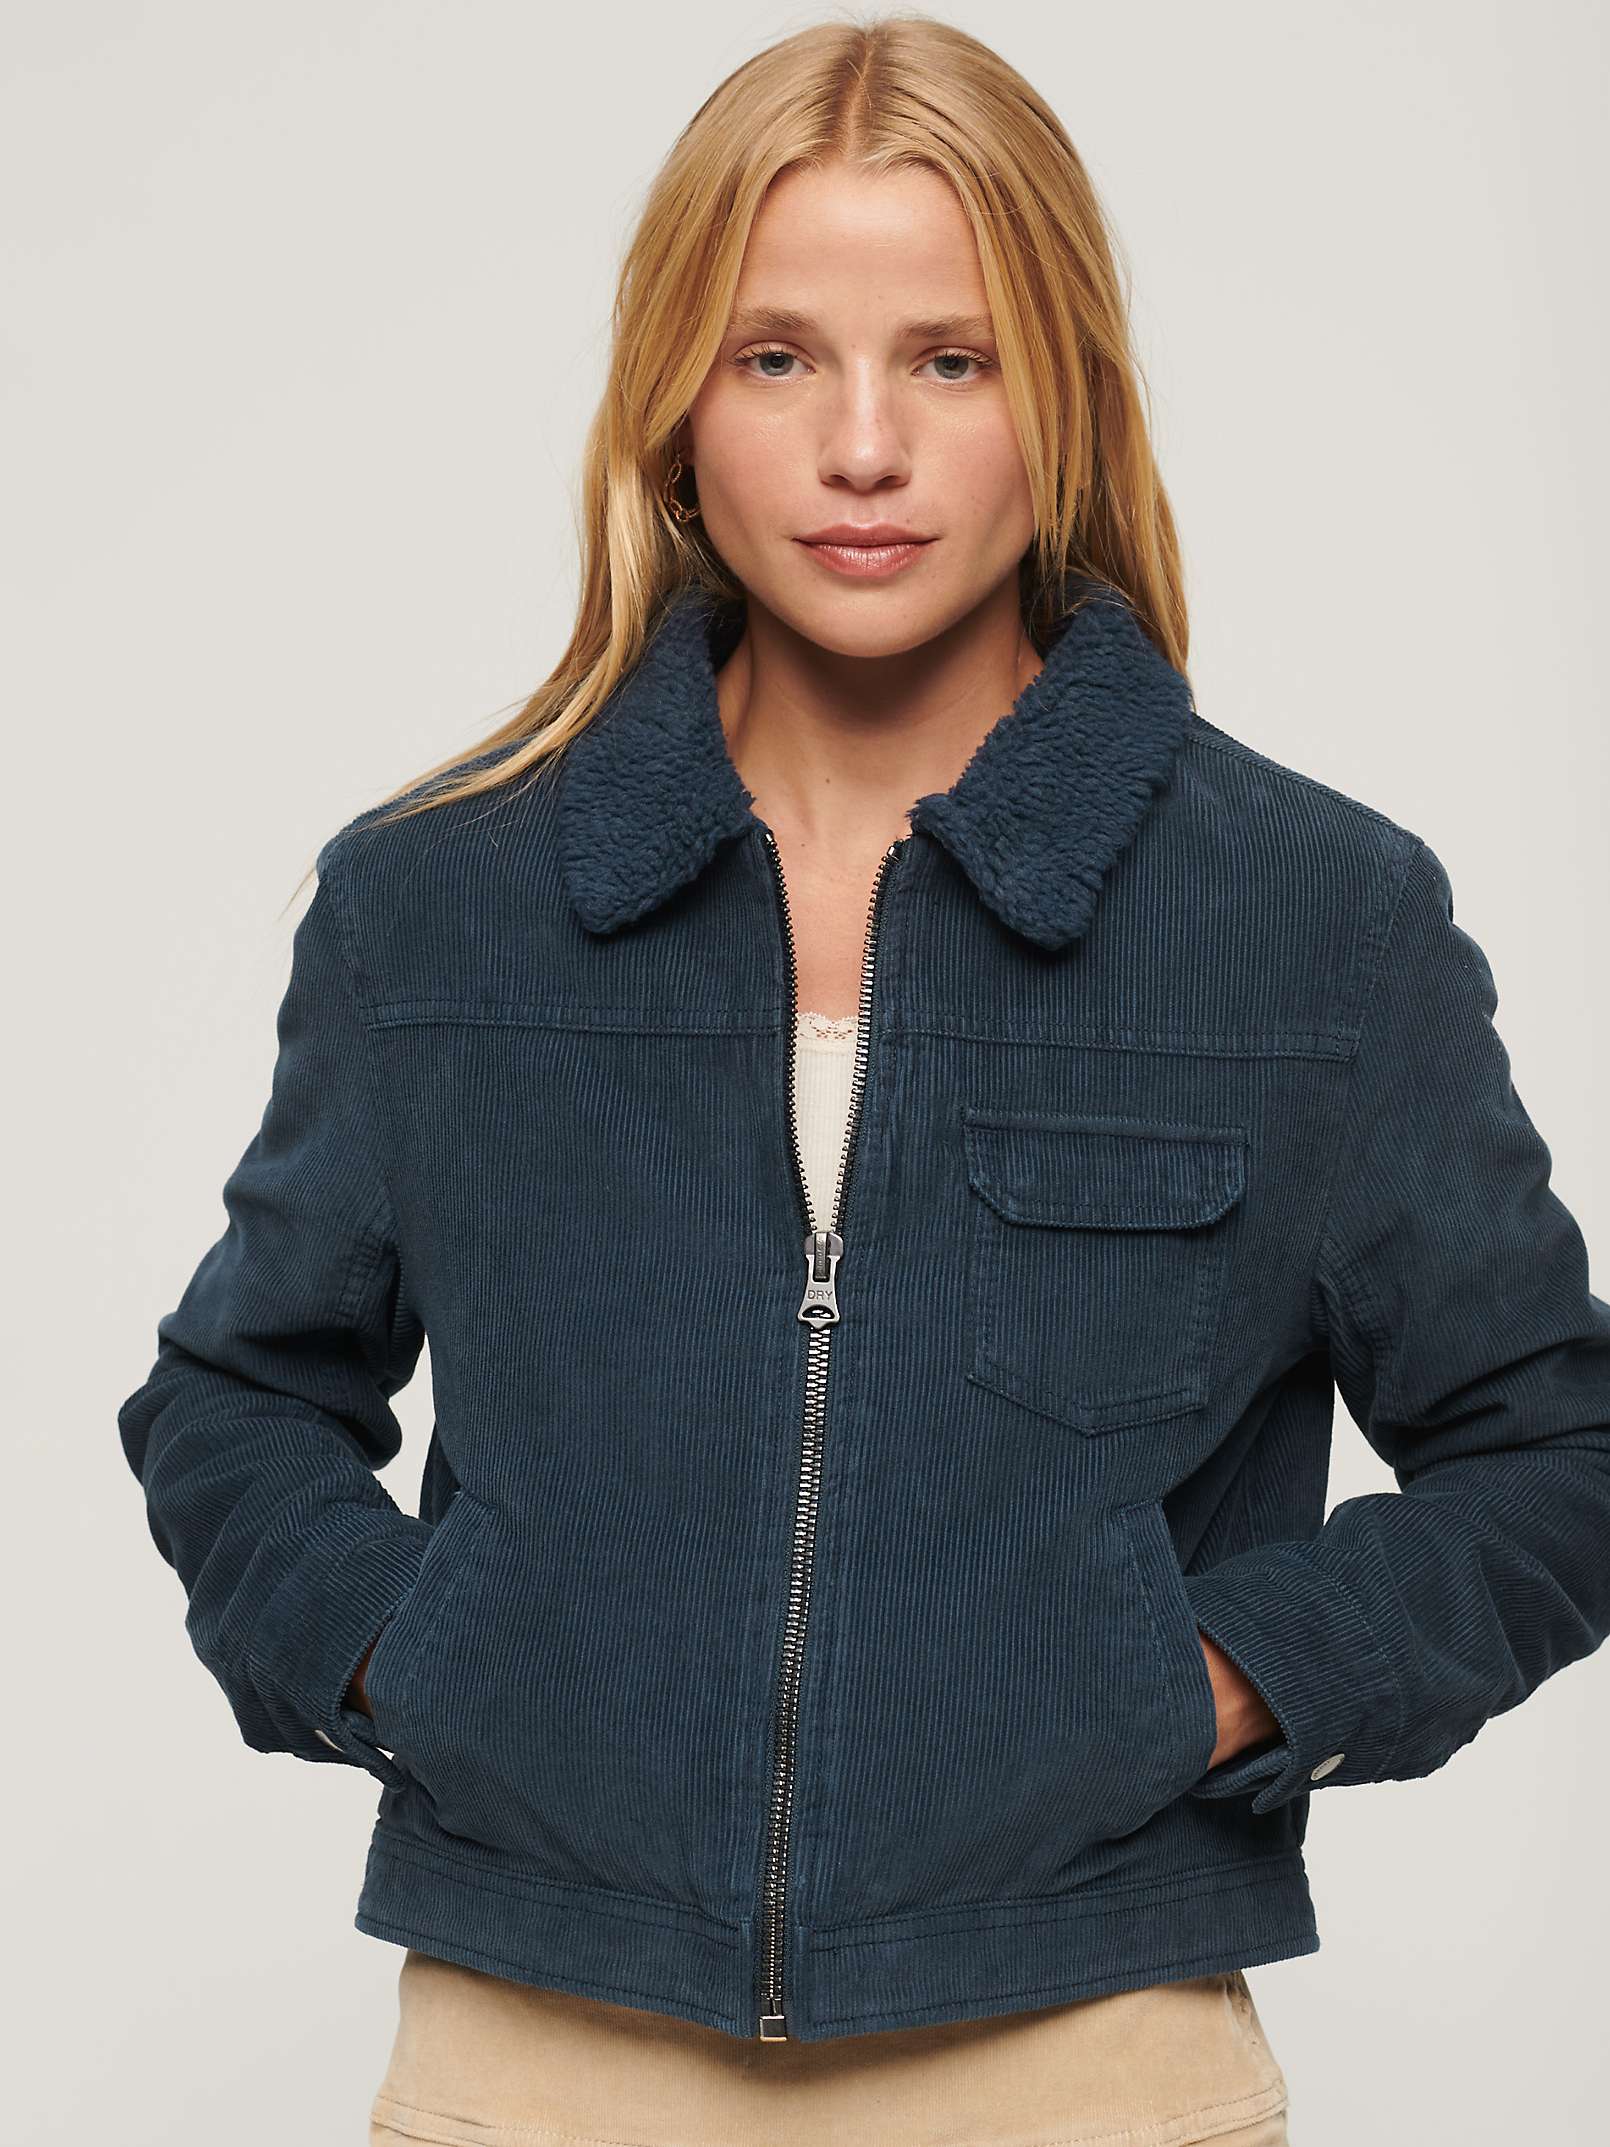 Buy Superdry Cropped Sherpa Lined Cord Jacket Online at johnlewis.com